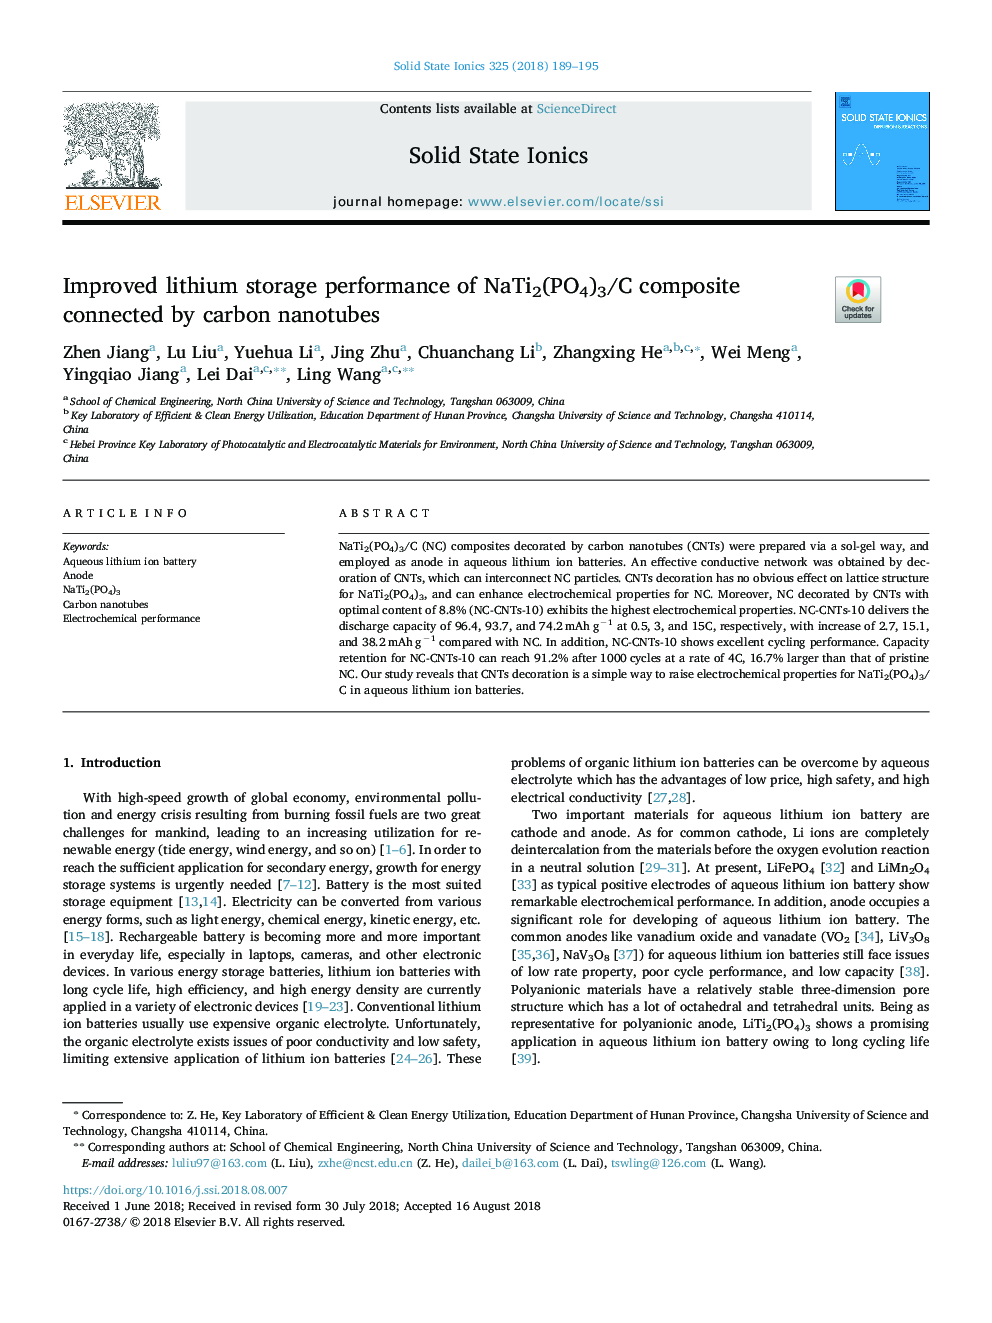 Improved lithium storage performance of NaTi2(PO4)3/C composite connected by carbon nanotubes